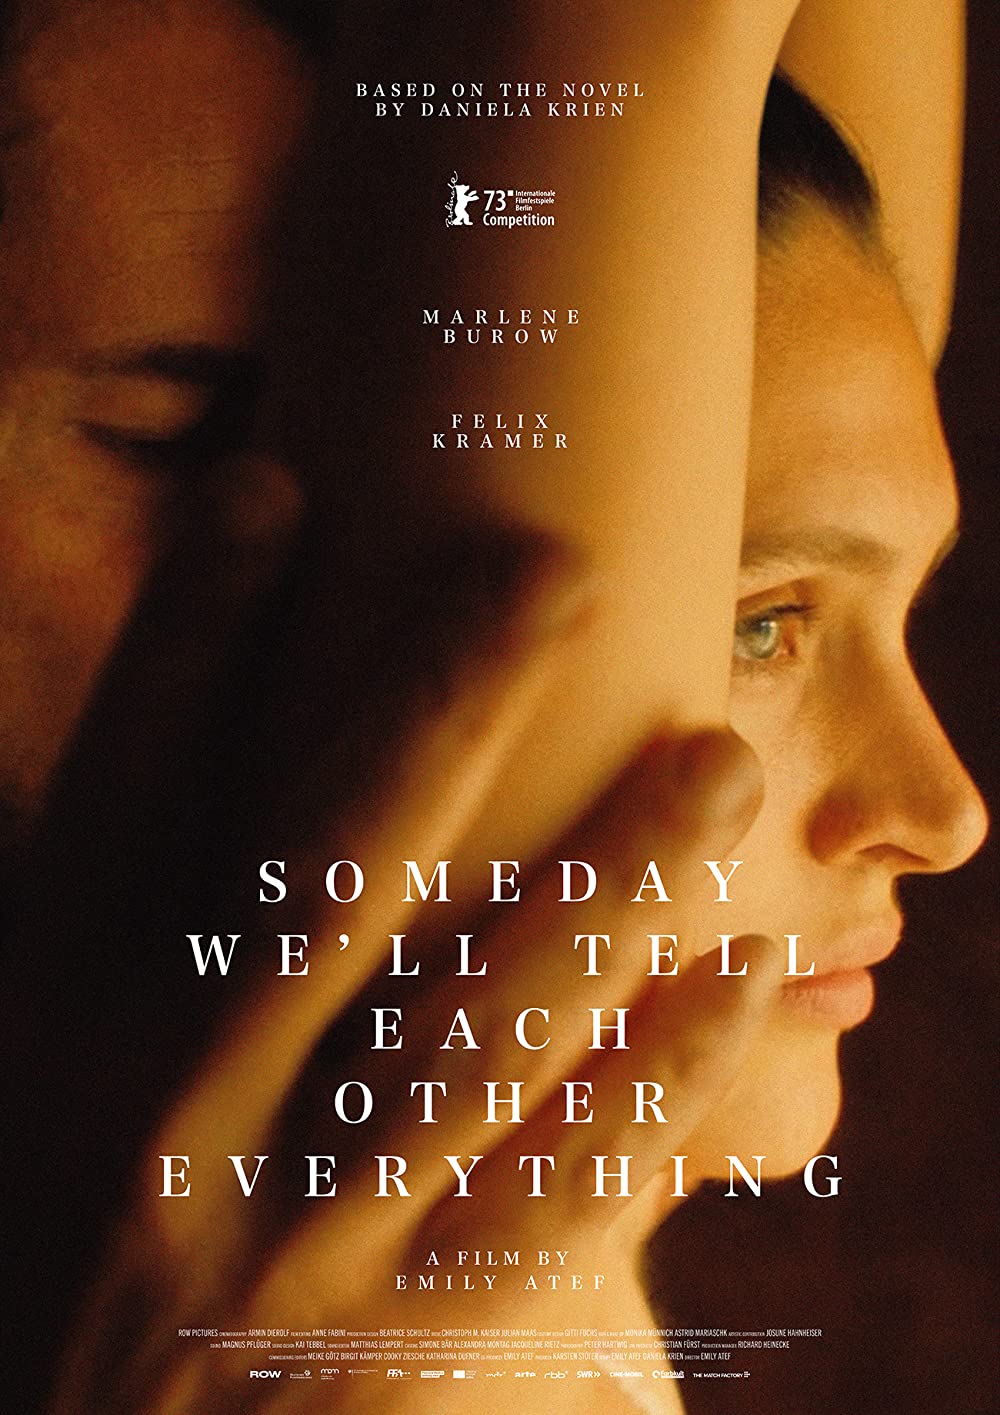 Someday We'll Tell Each Other Everything Movie (2023) Cast, Release Date, Story, Budget, Collection, Poster, Trailer, Review